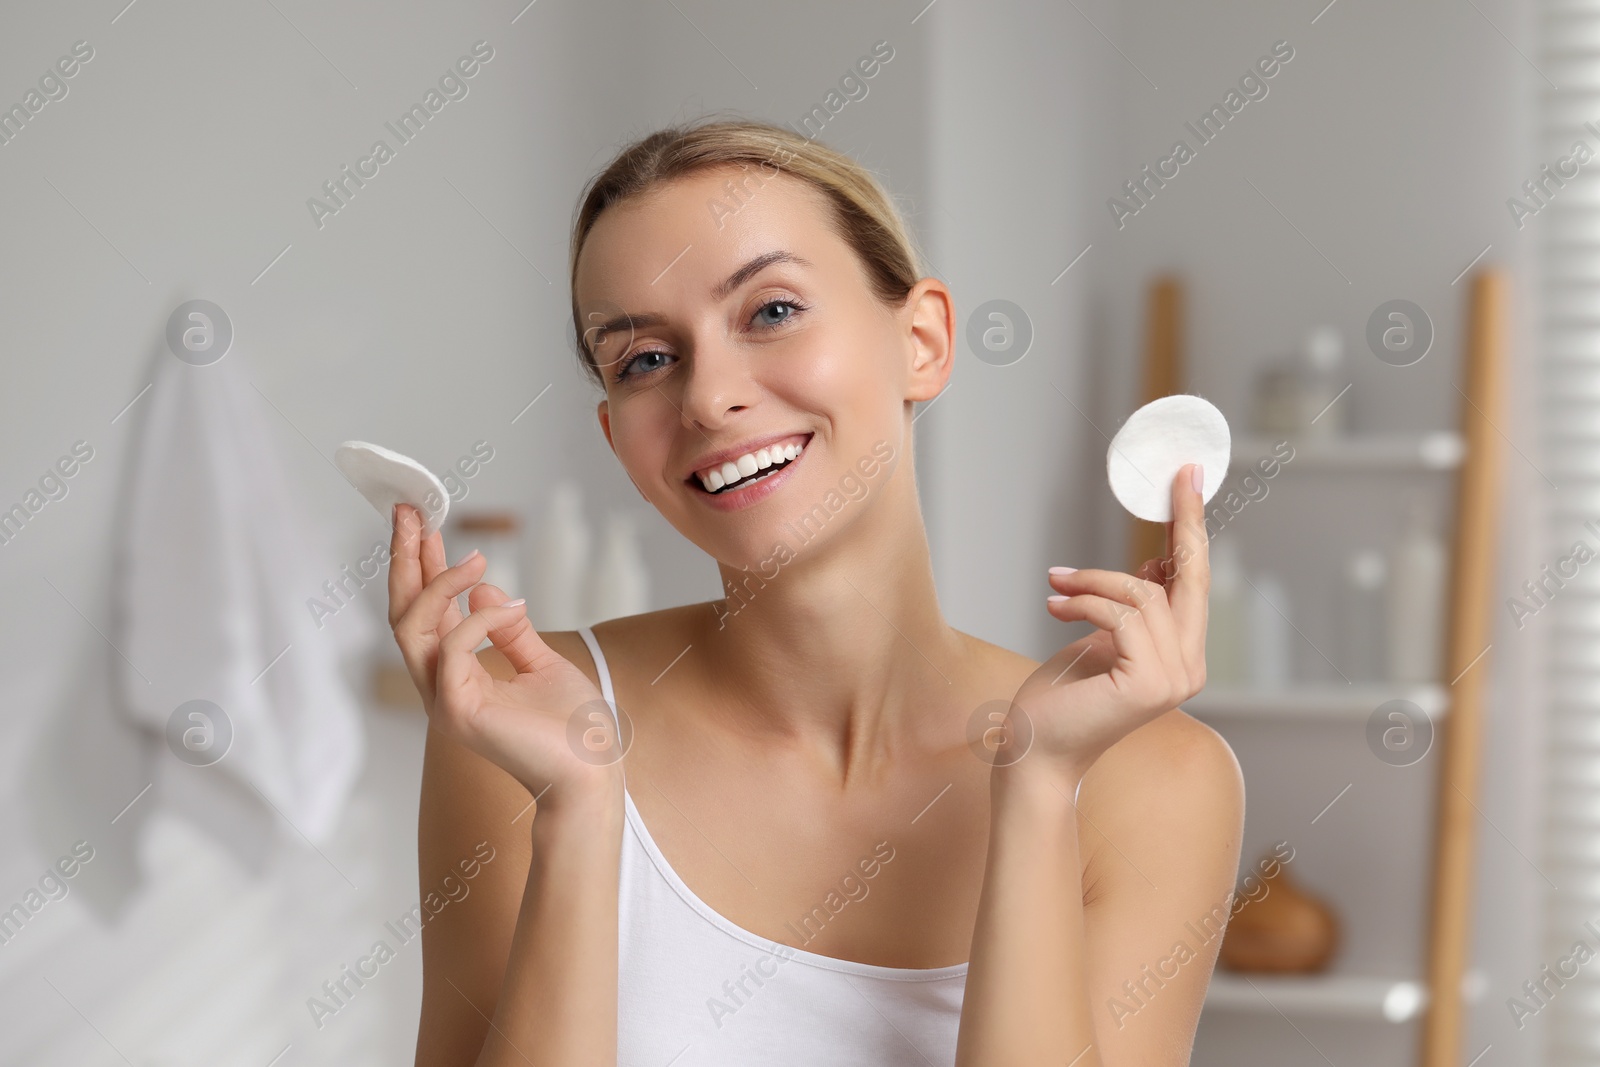 Photo of Removing makeup. Smiling woman with cotton pads indoors